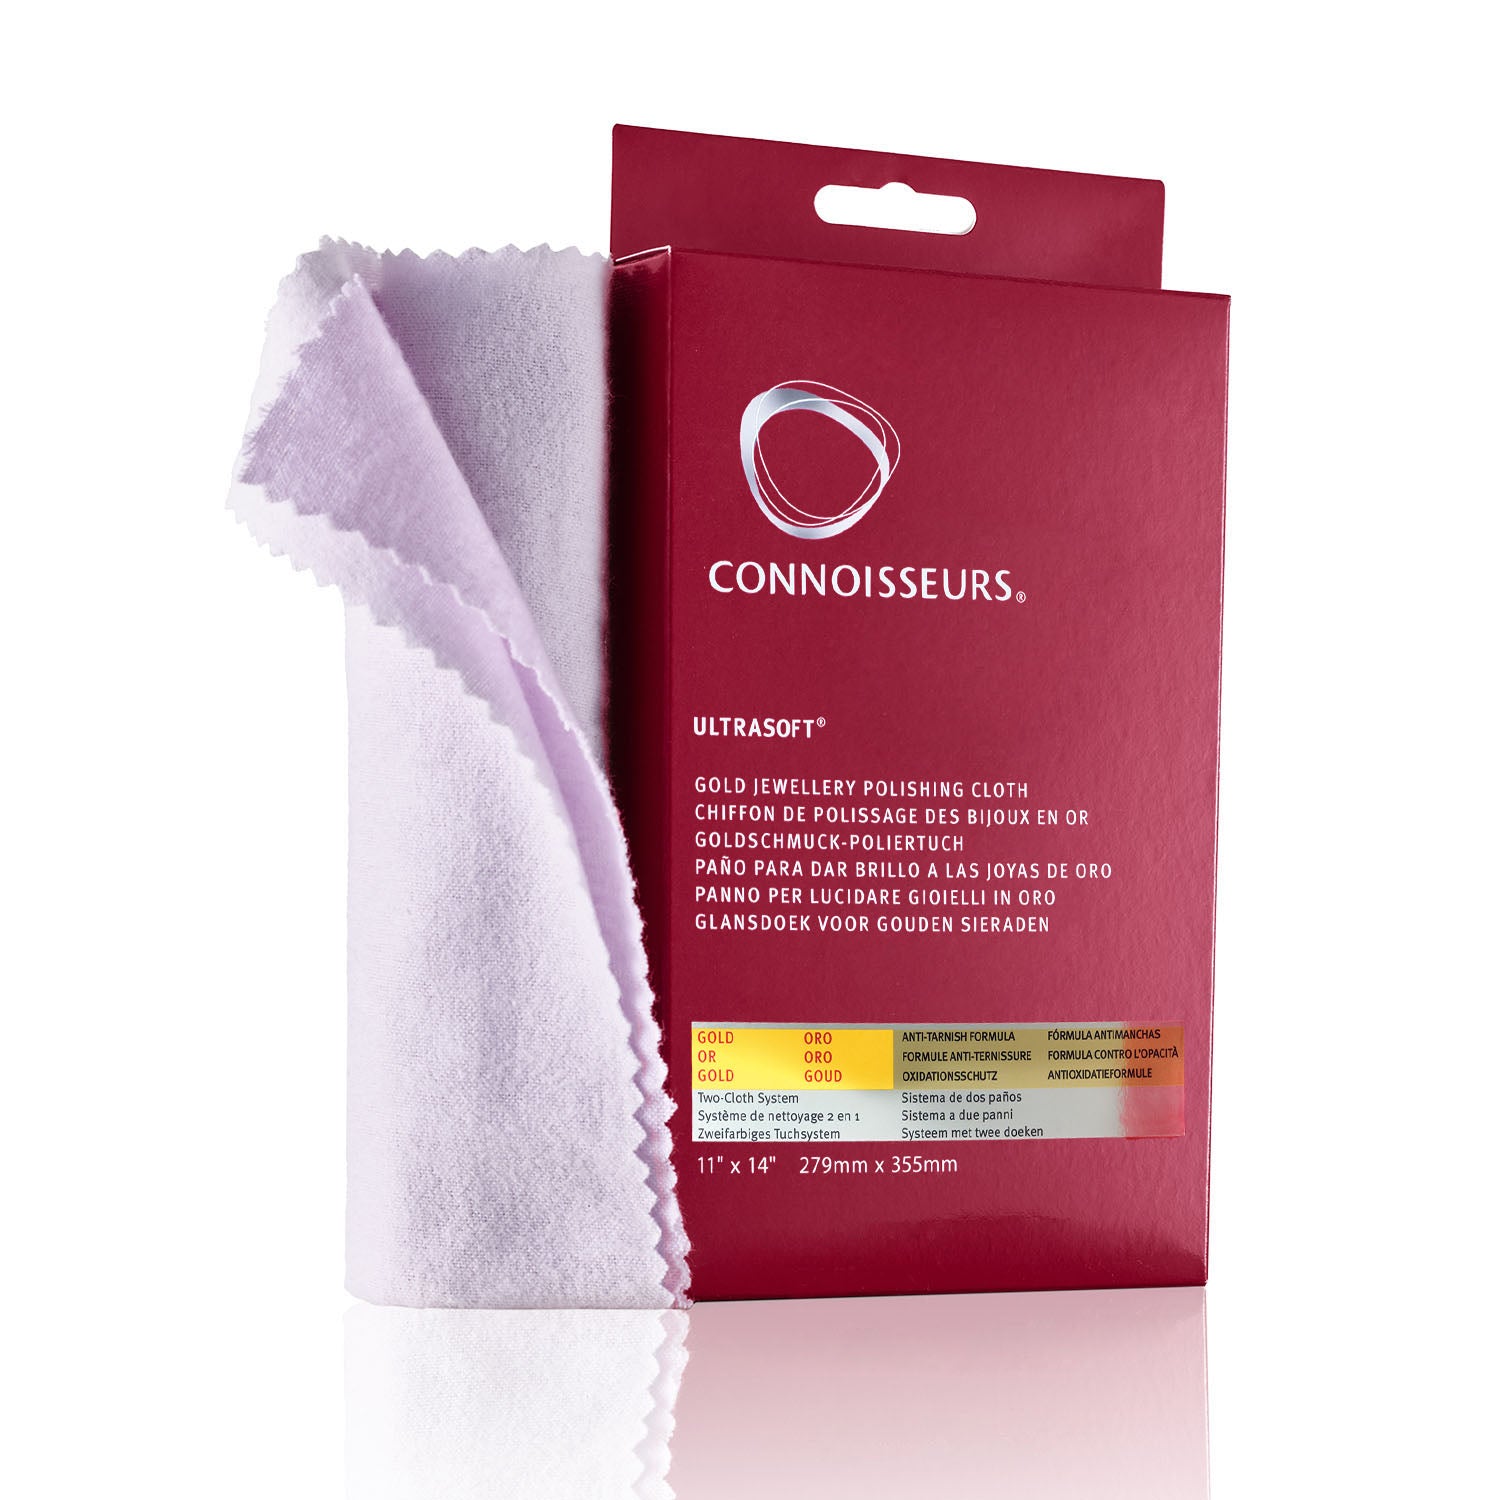 Connoisseurs Gold Polishing Cloth 11 X 14 Inches for sale online